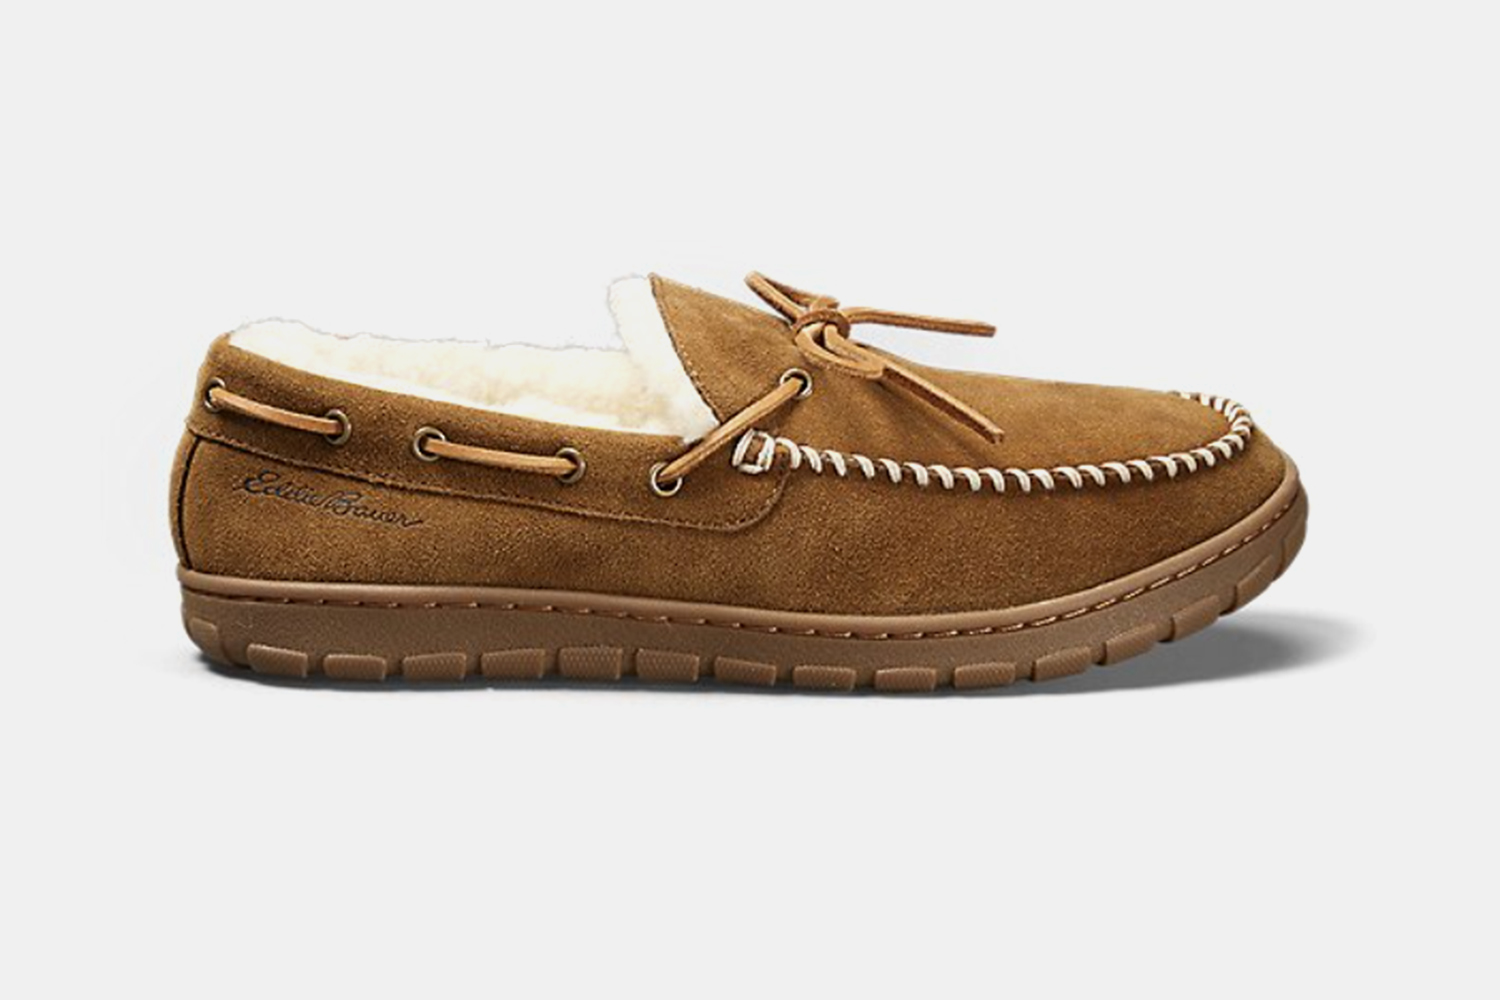 acceptabel hurtig Ambassade These Shearling-Lined Slippers Are $33 Off at Eddie Bauer - InsideHook